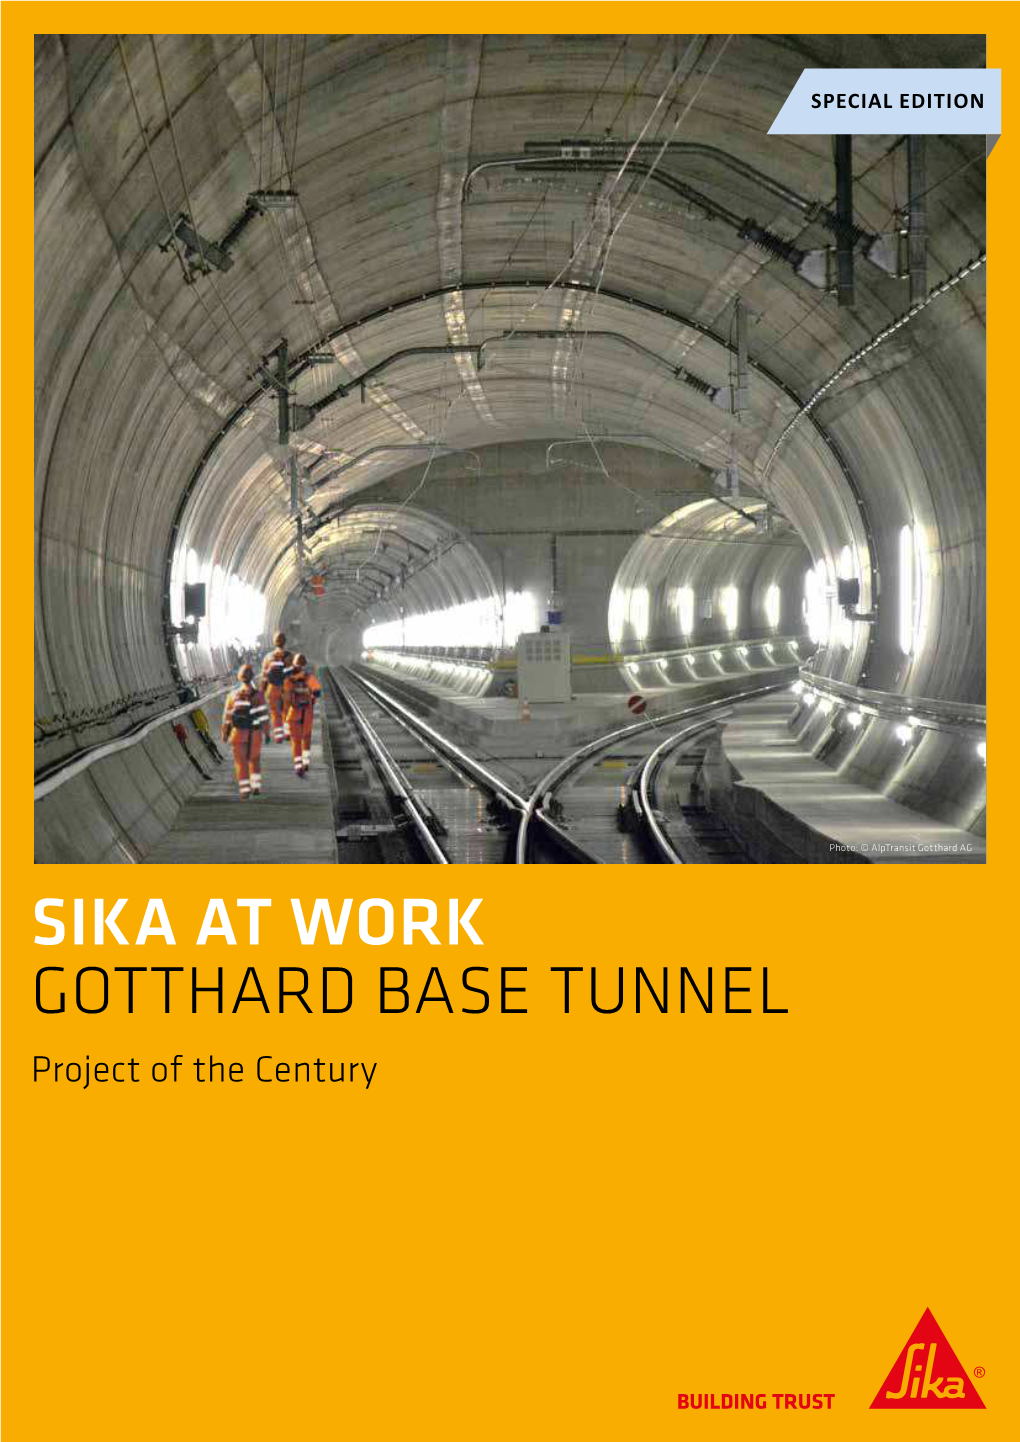 GOTTHARD BASE TUNNEL Project of the Century EDITORIAL